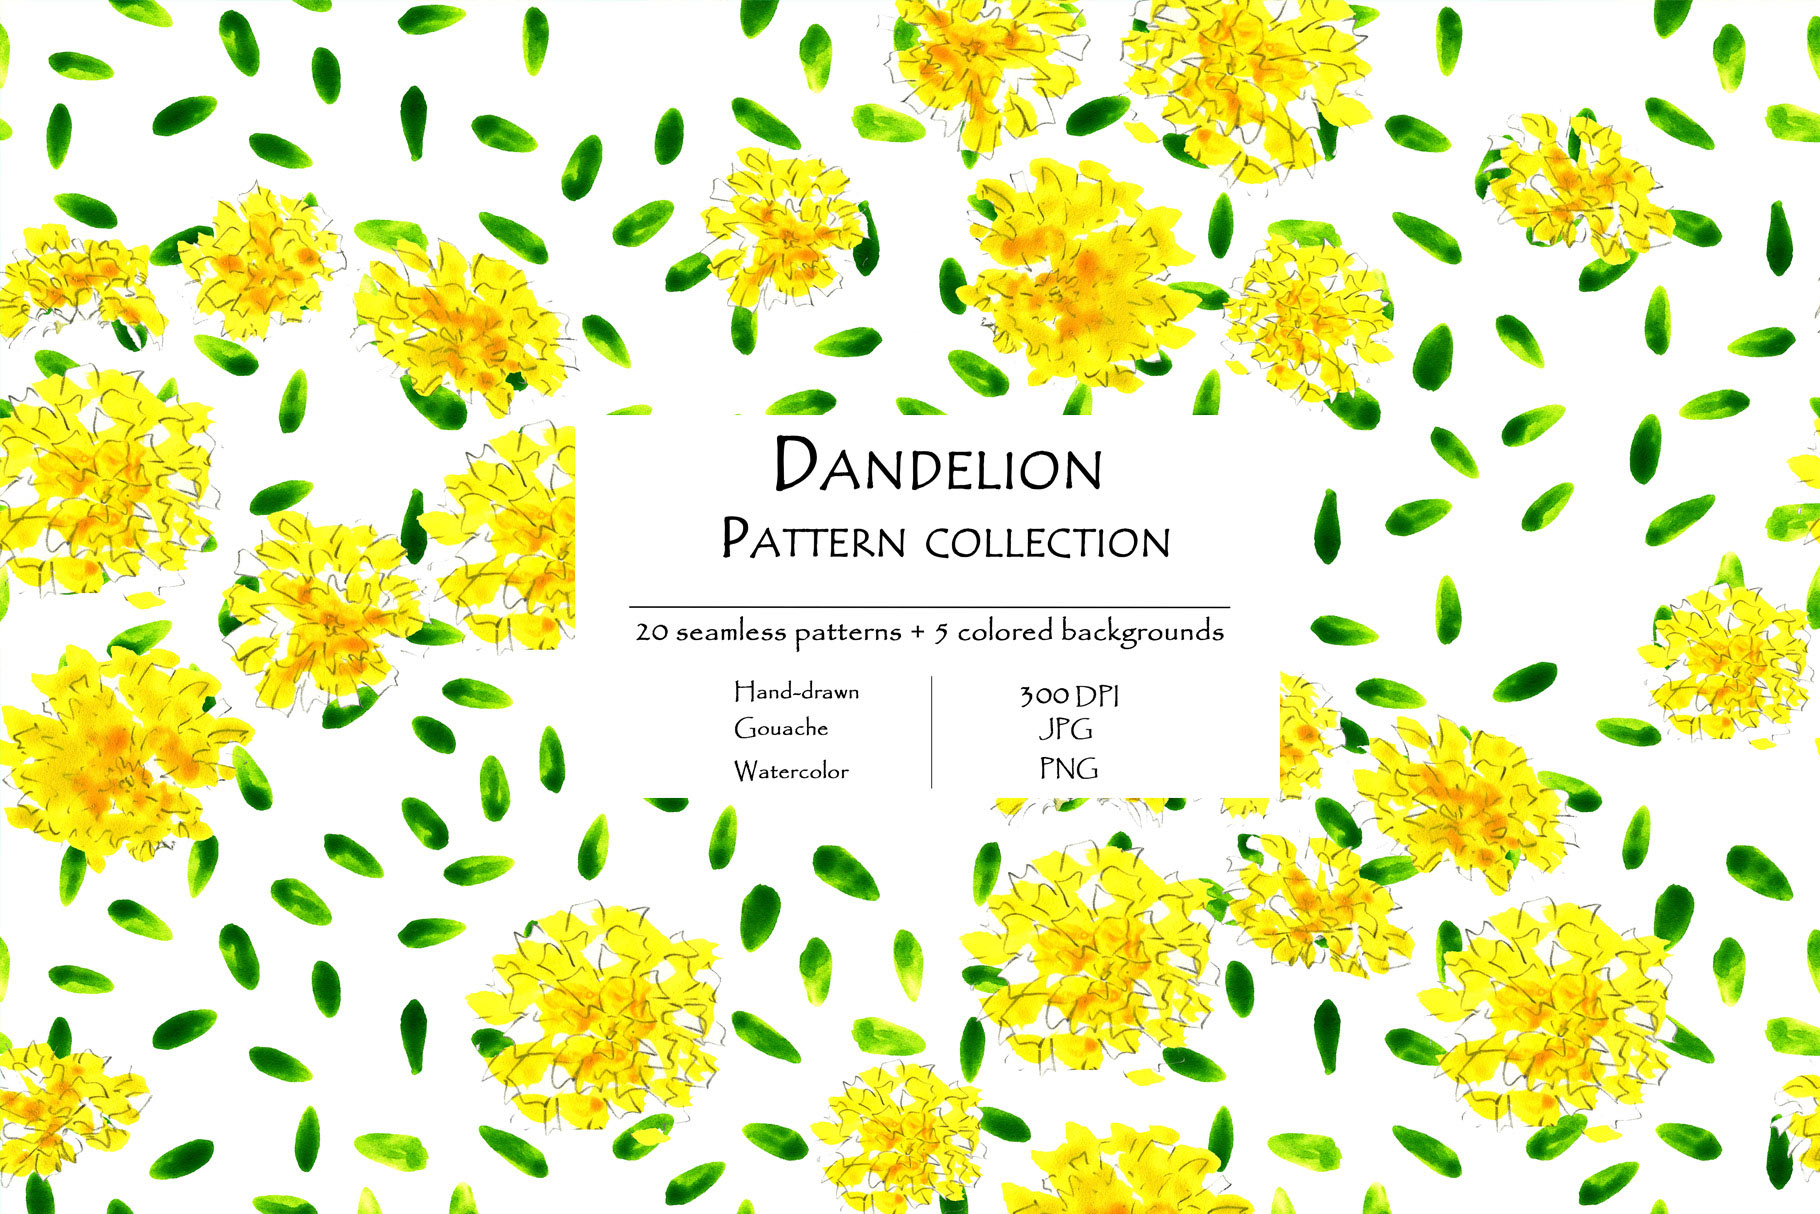 Dandelion Pattern Collection Of 20 Seamless Patterns And 5 Colored Background Cover Example.